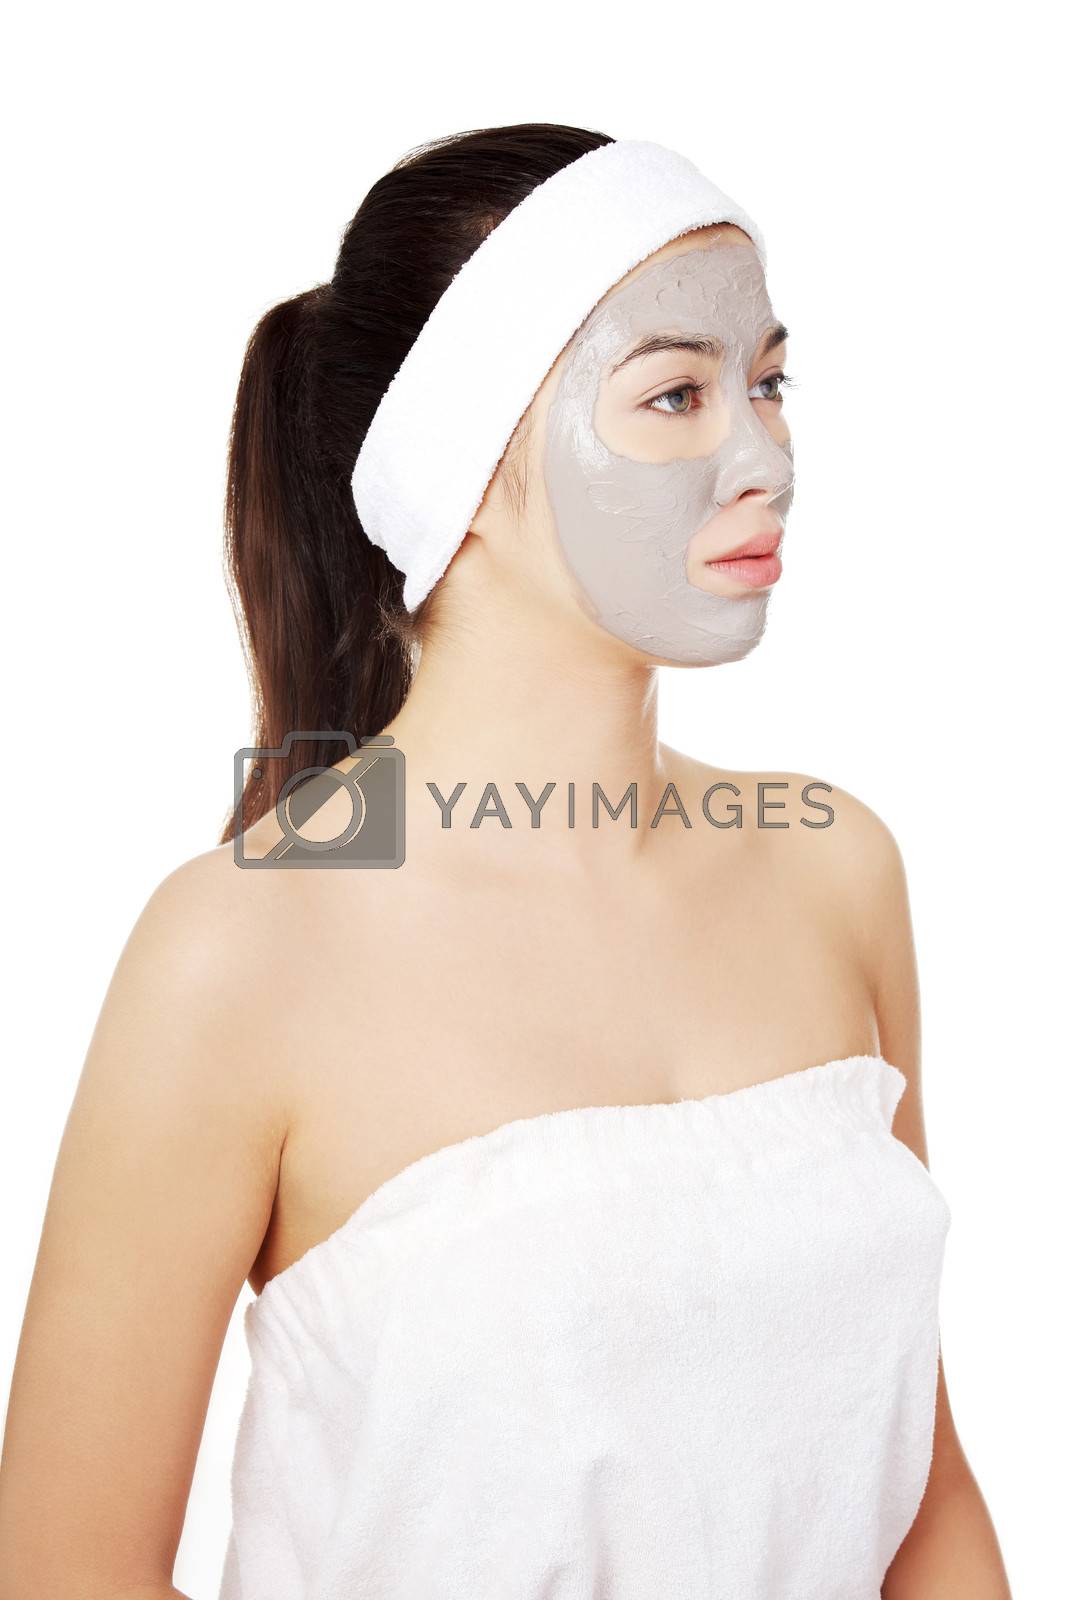 Royalty free image of Beautiful woman with clay facial mask by BDS